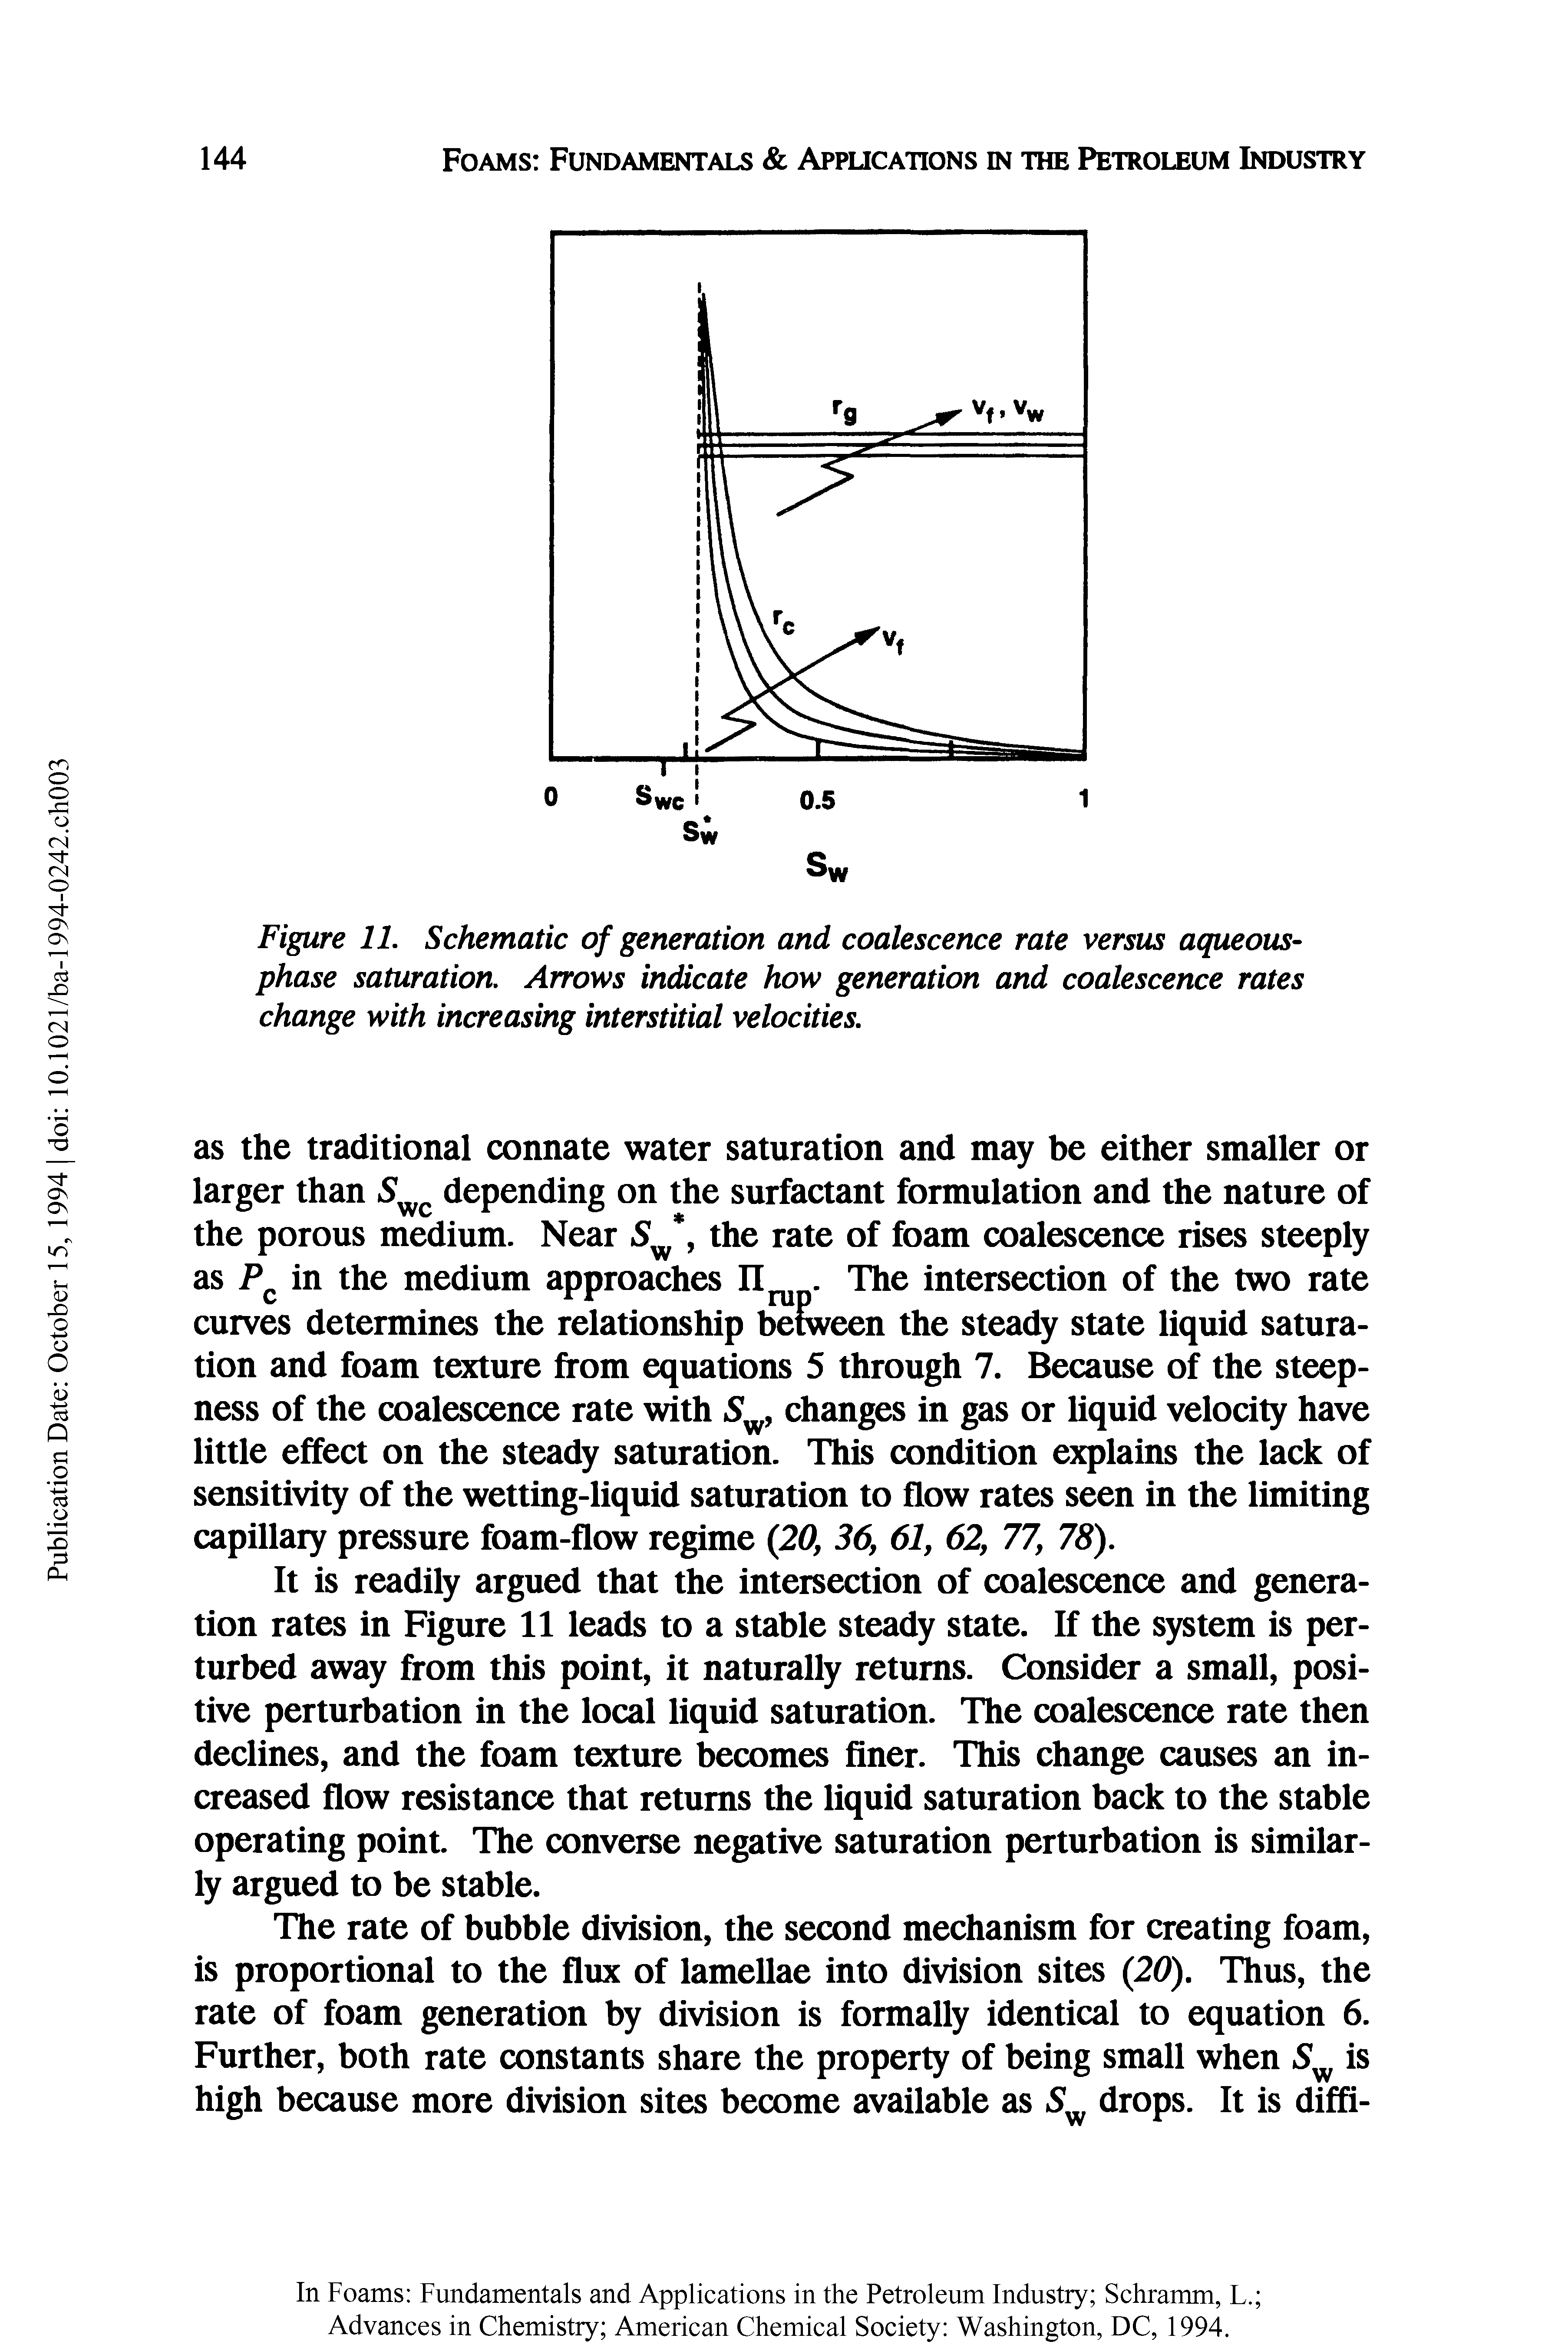 Figure 11. Schematic of generation and coalescence rate versus aqueous-phase saturation. Arrows indicate how generation and coalescence rates change with increasing interstitial velocities.